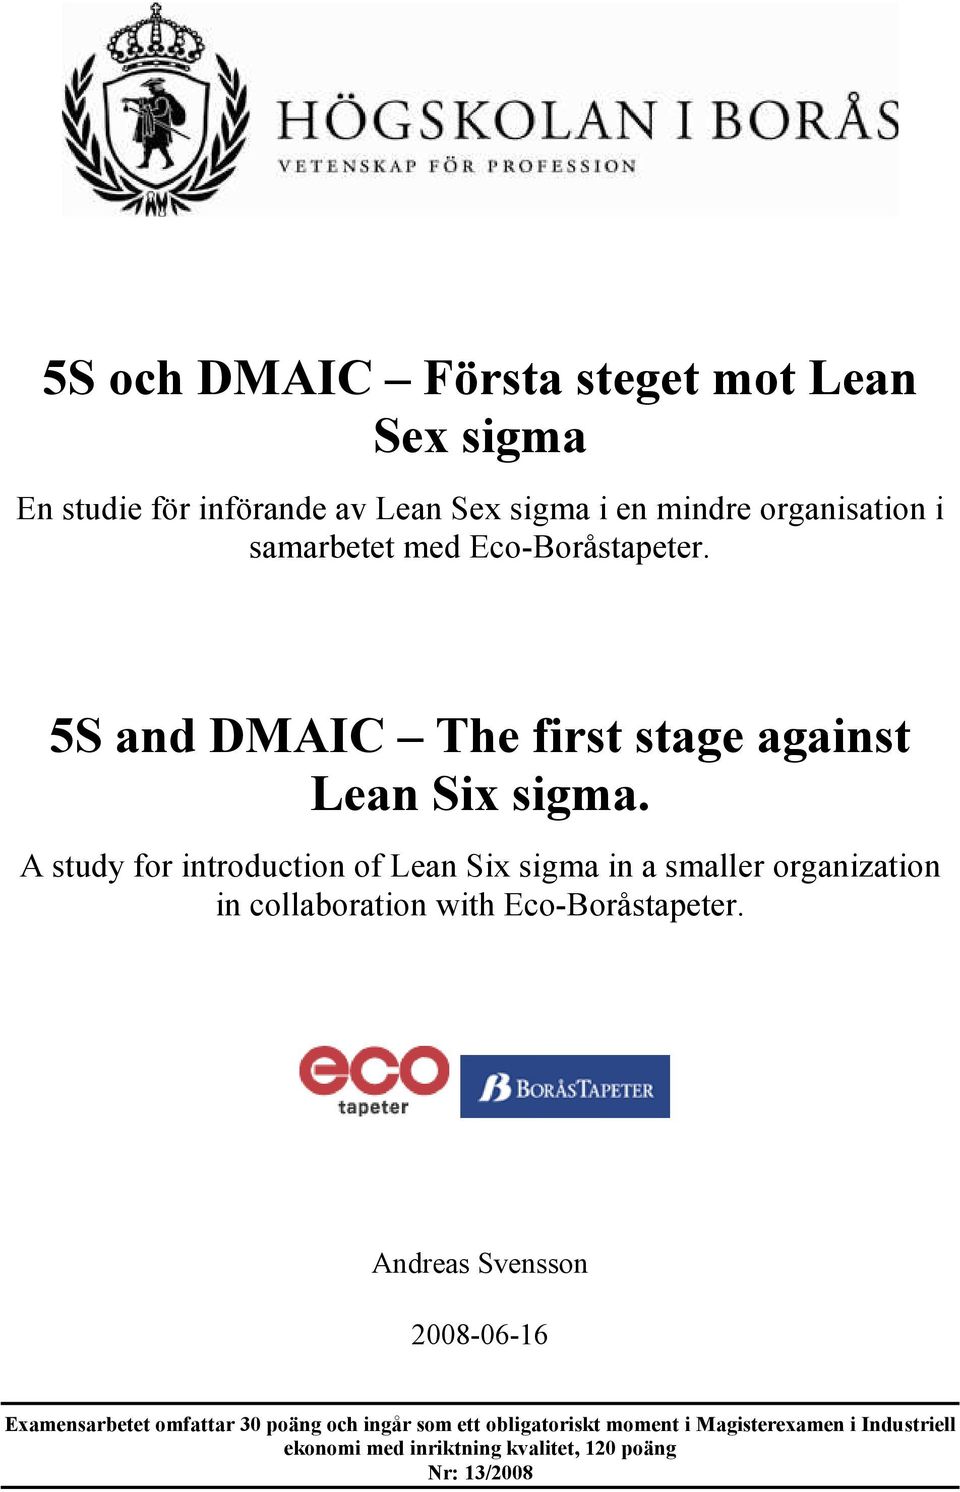 A study for introduction of Lean Six sigma in a smaller organization in collaboration with Eco-Boråstapeter.